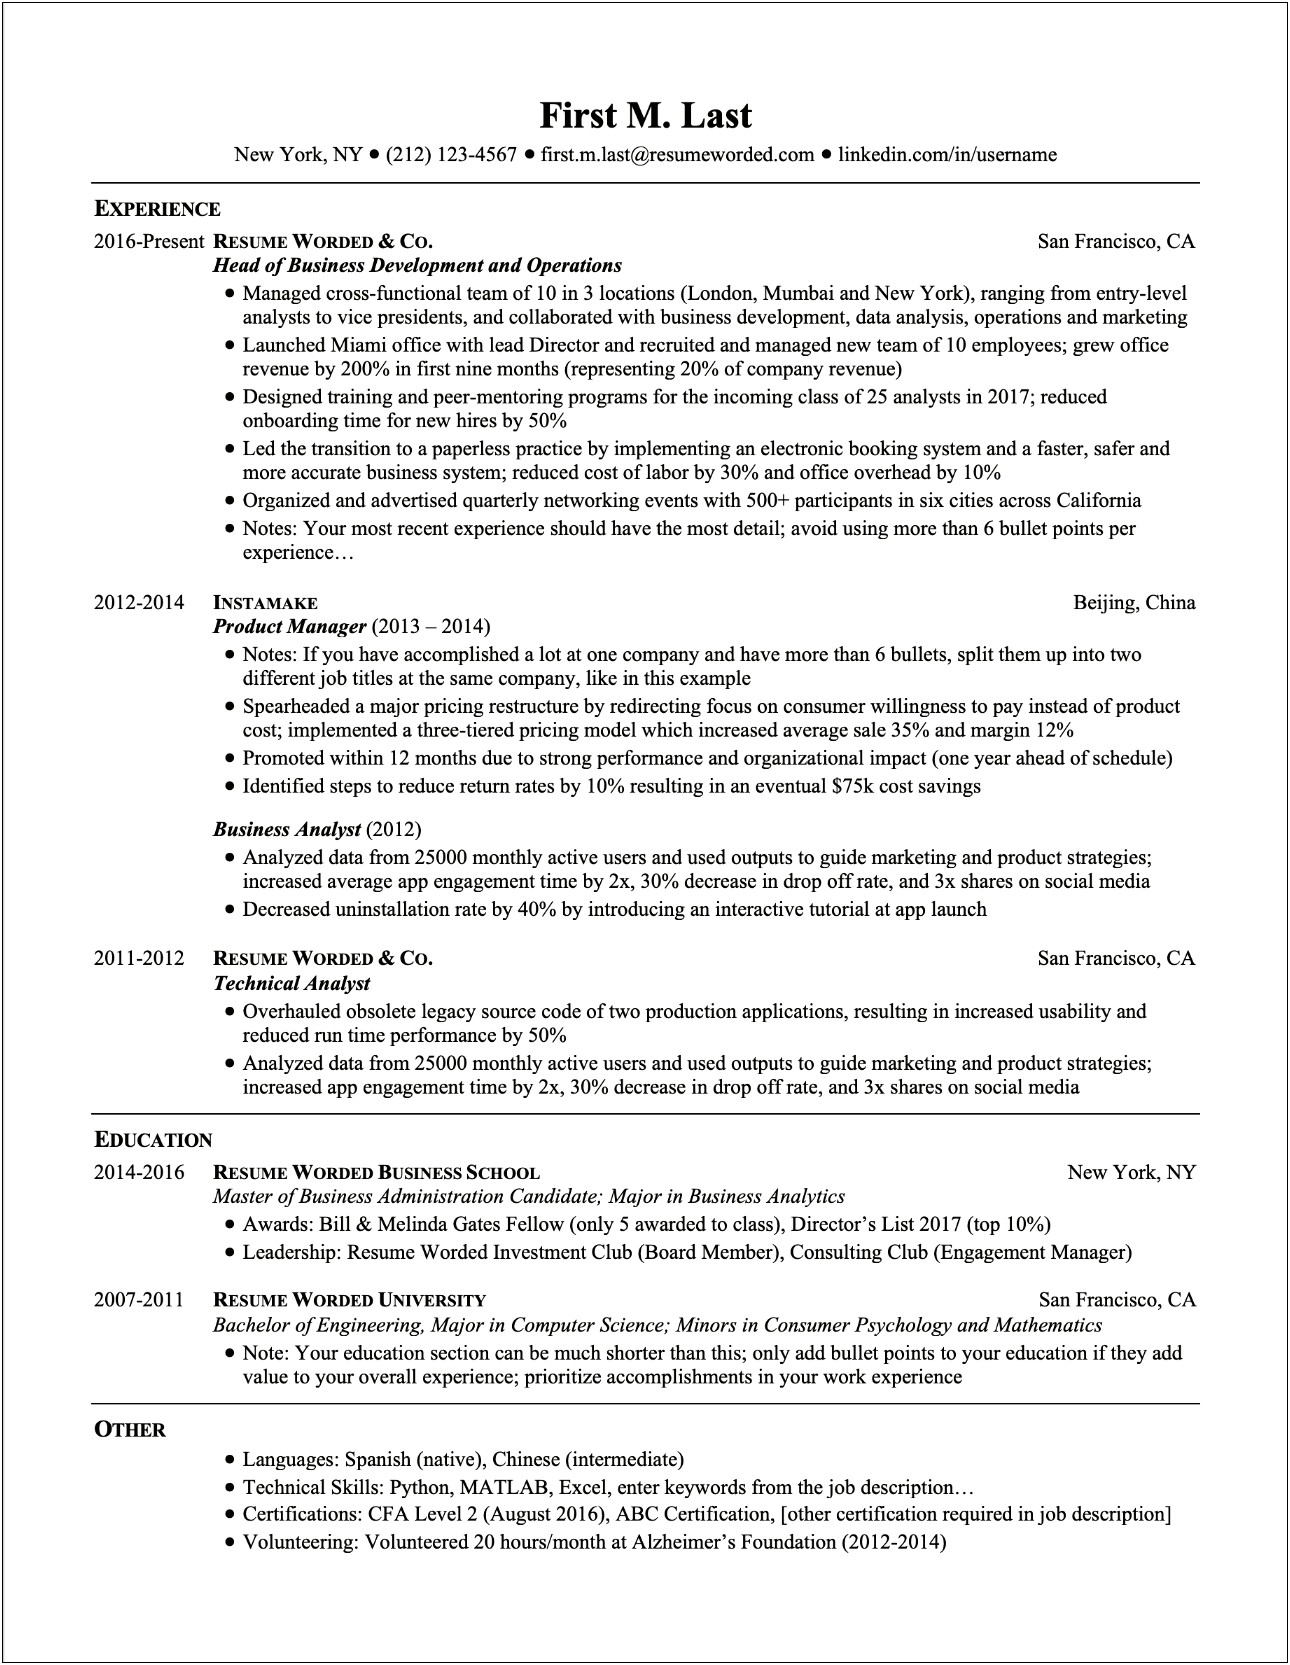 Bullets Or Summary Paragraphs For Professional Resume